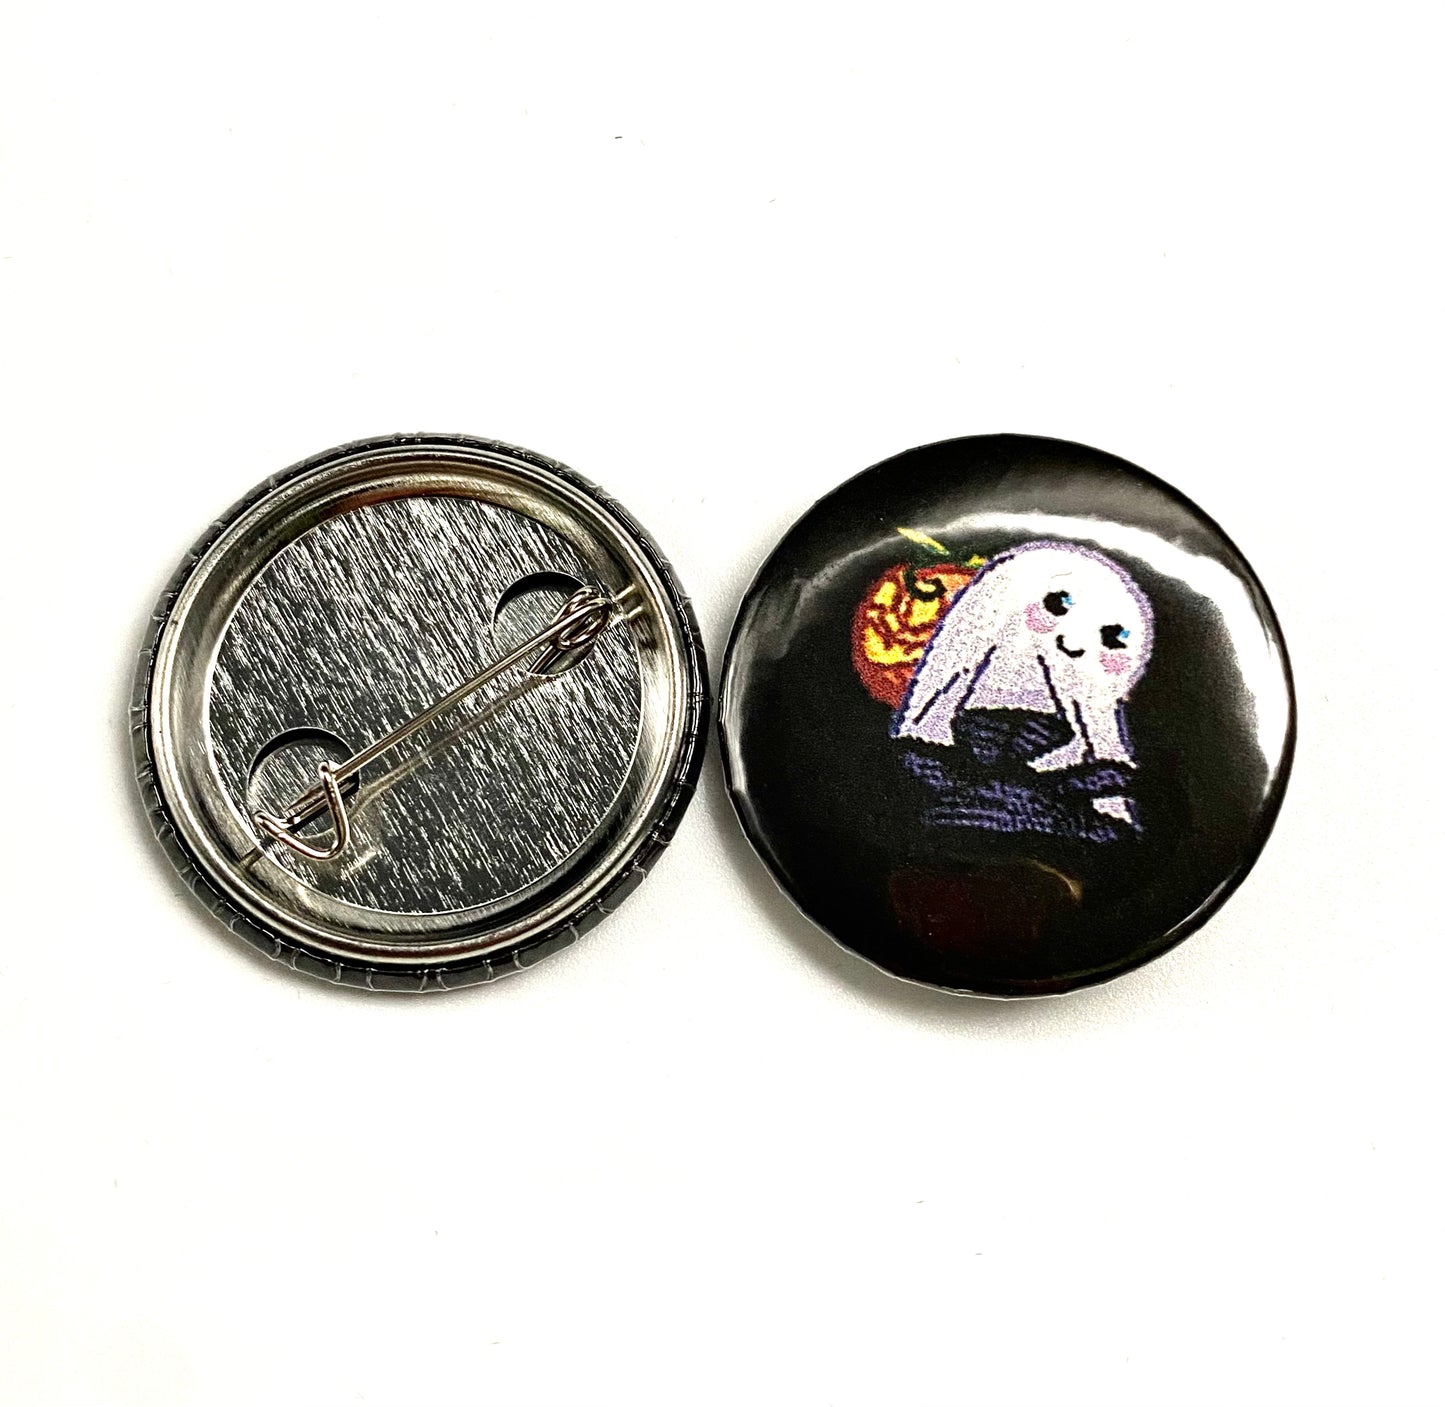 Pixel Ghost Button Pin